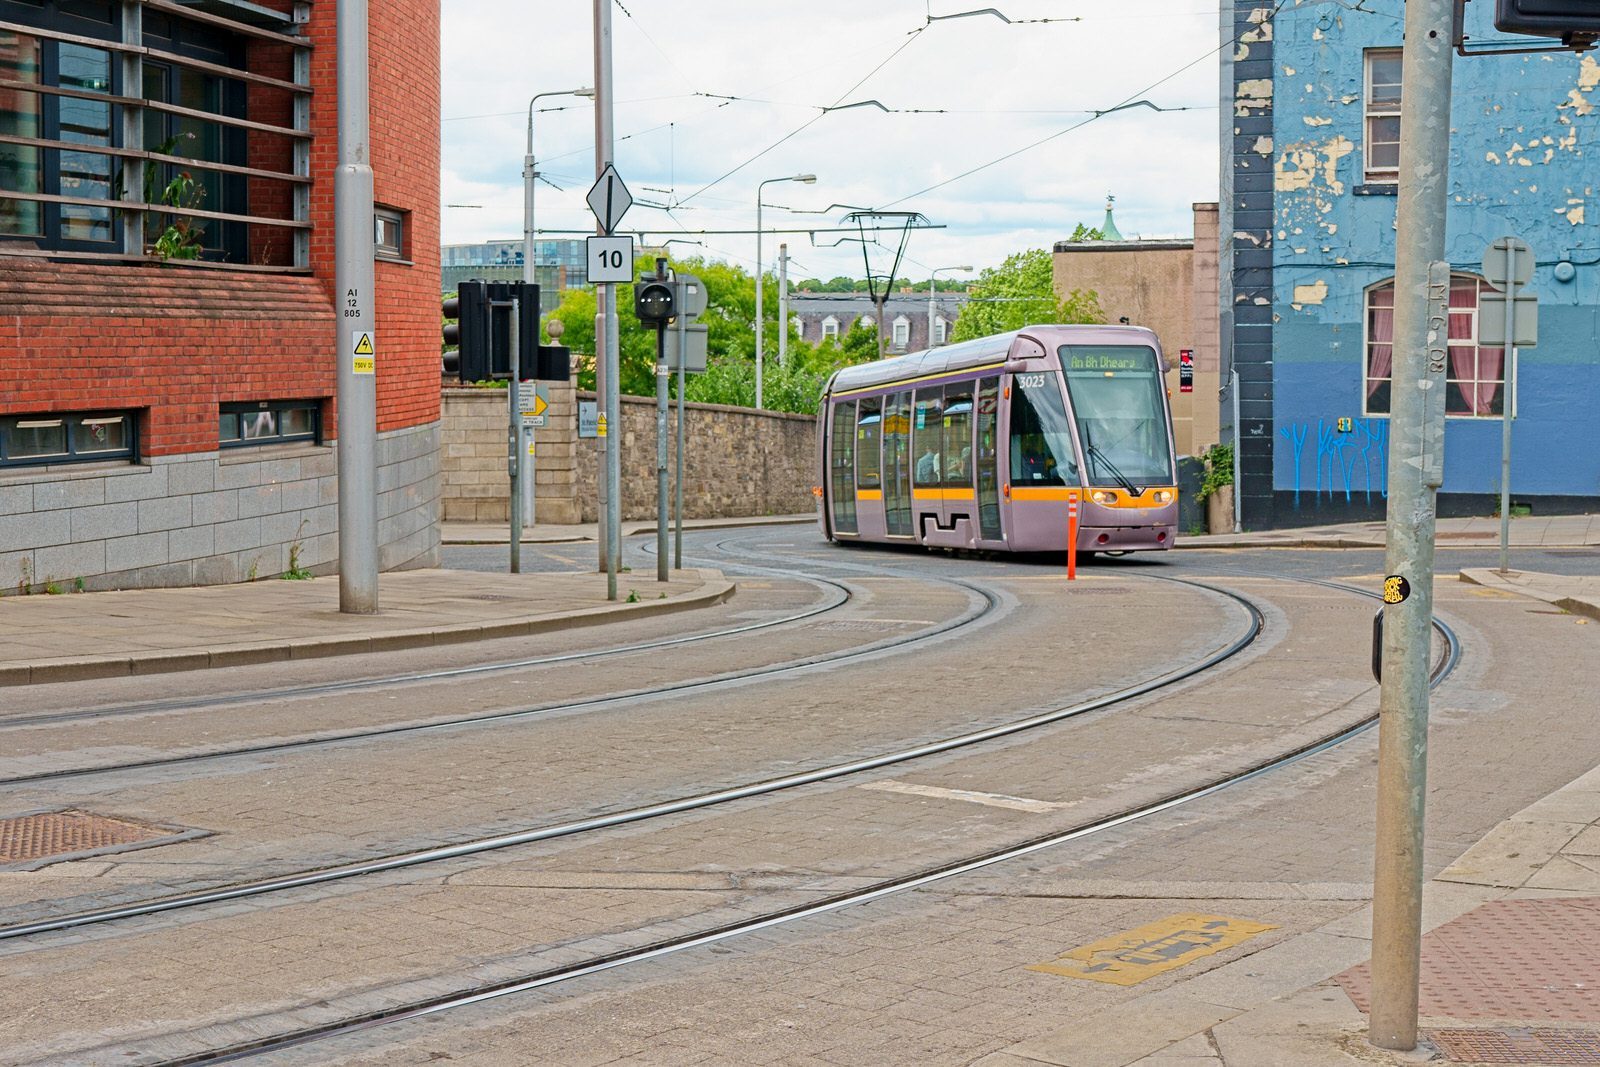 WHY WOULD ANYONE PHOTOGRAPH A TRAM COMING UP A HILL - A PASSERBY ACTUALLY ASKED ME [MAYBE THE BARD HAS AN ANSWER] 005